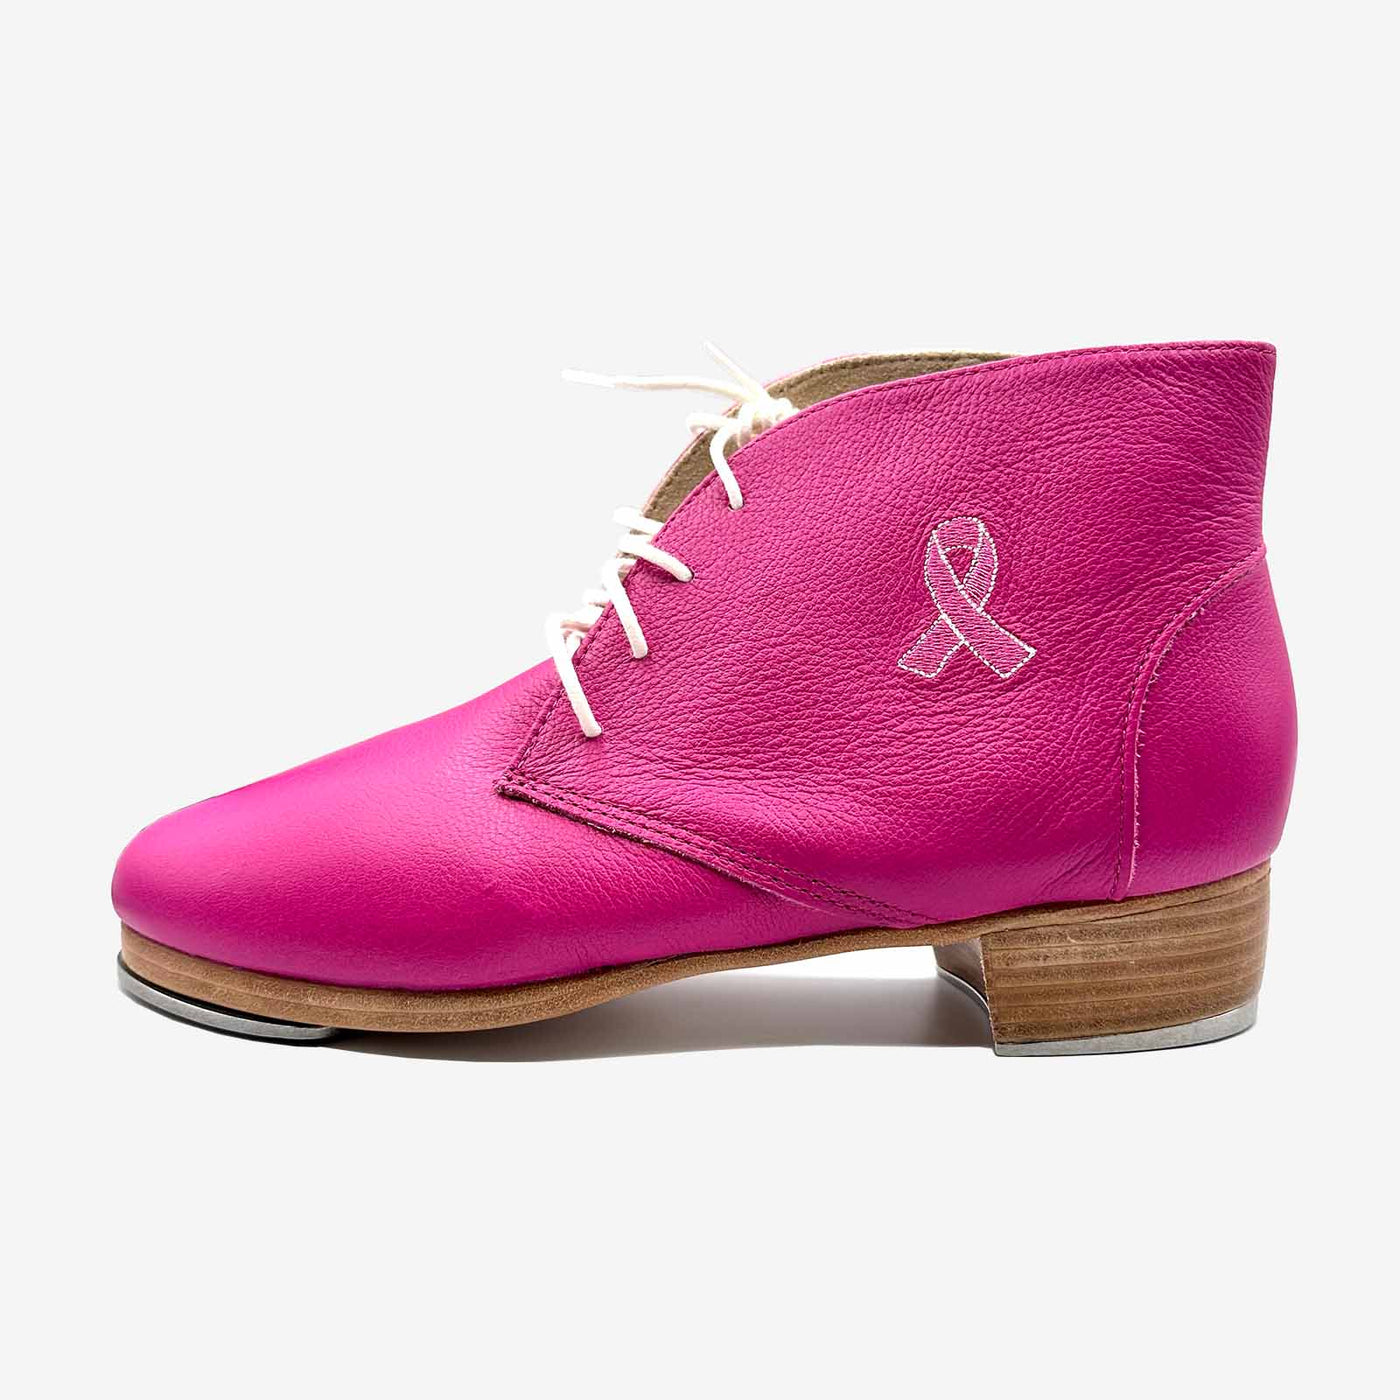 Breast Cancer Awareness Tap Boot - TA960 (Unisex)